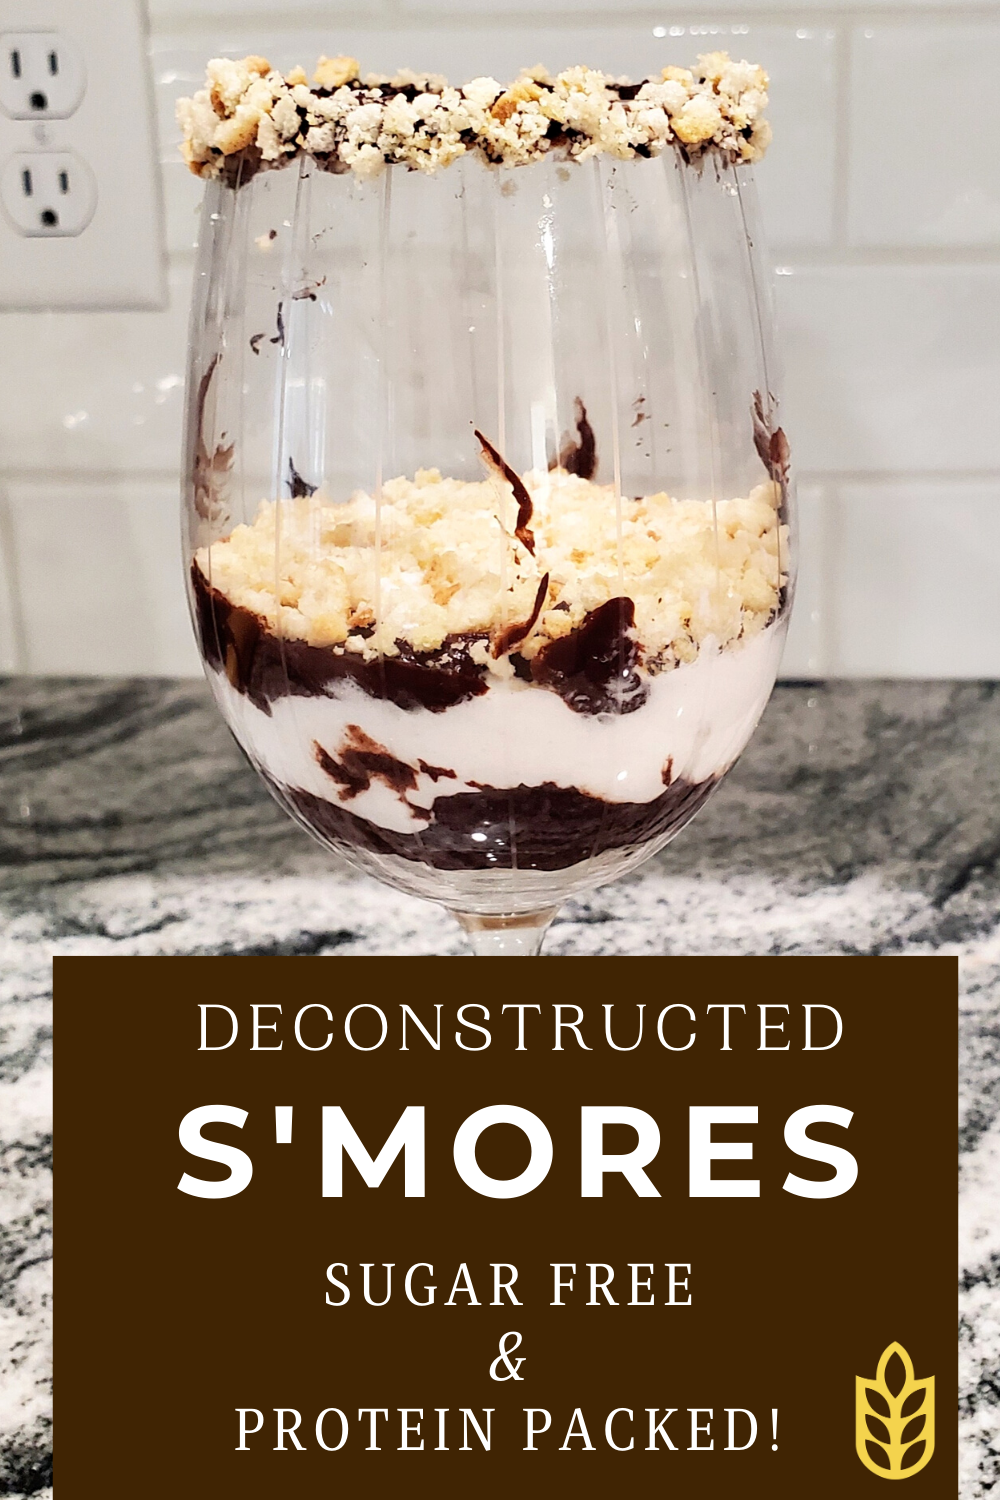 Deconstructed S'mores Image